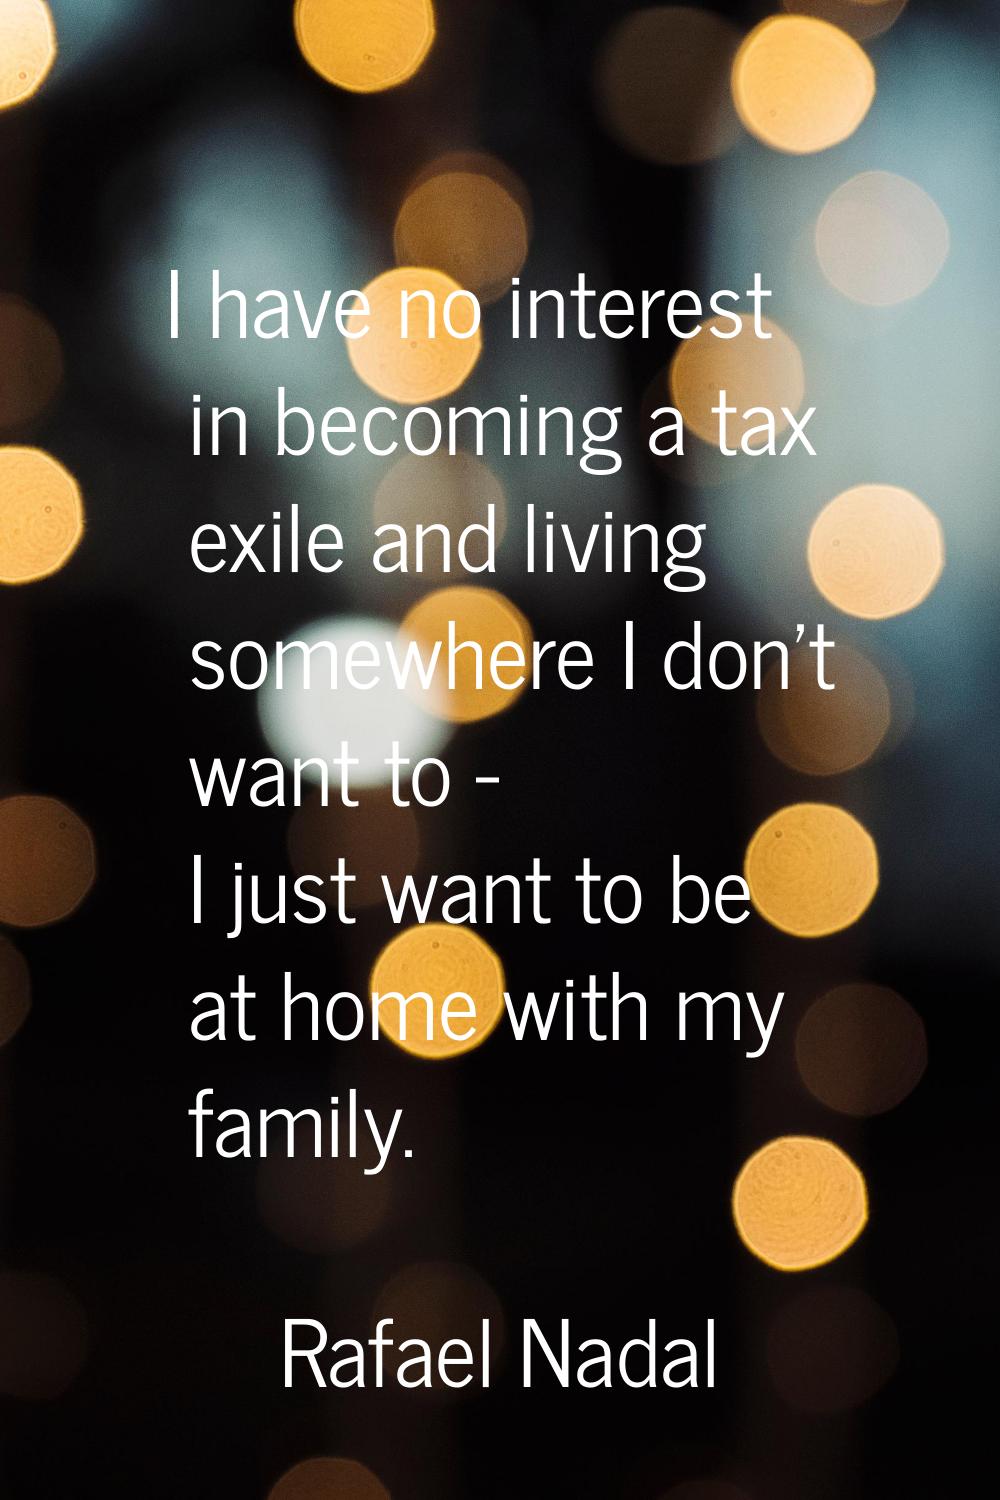 I have no interest in becoming a tax exile and living somewhere I don't want to - I just want to be